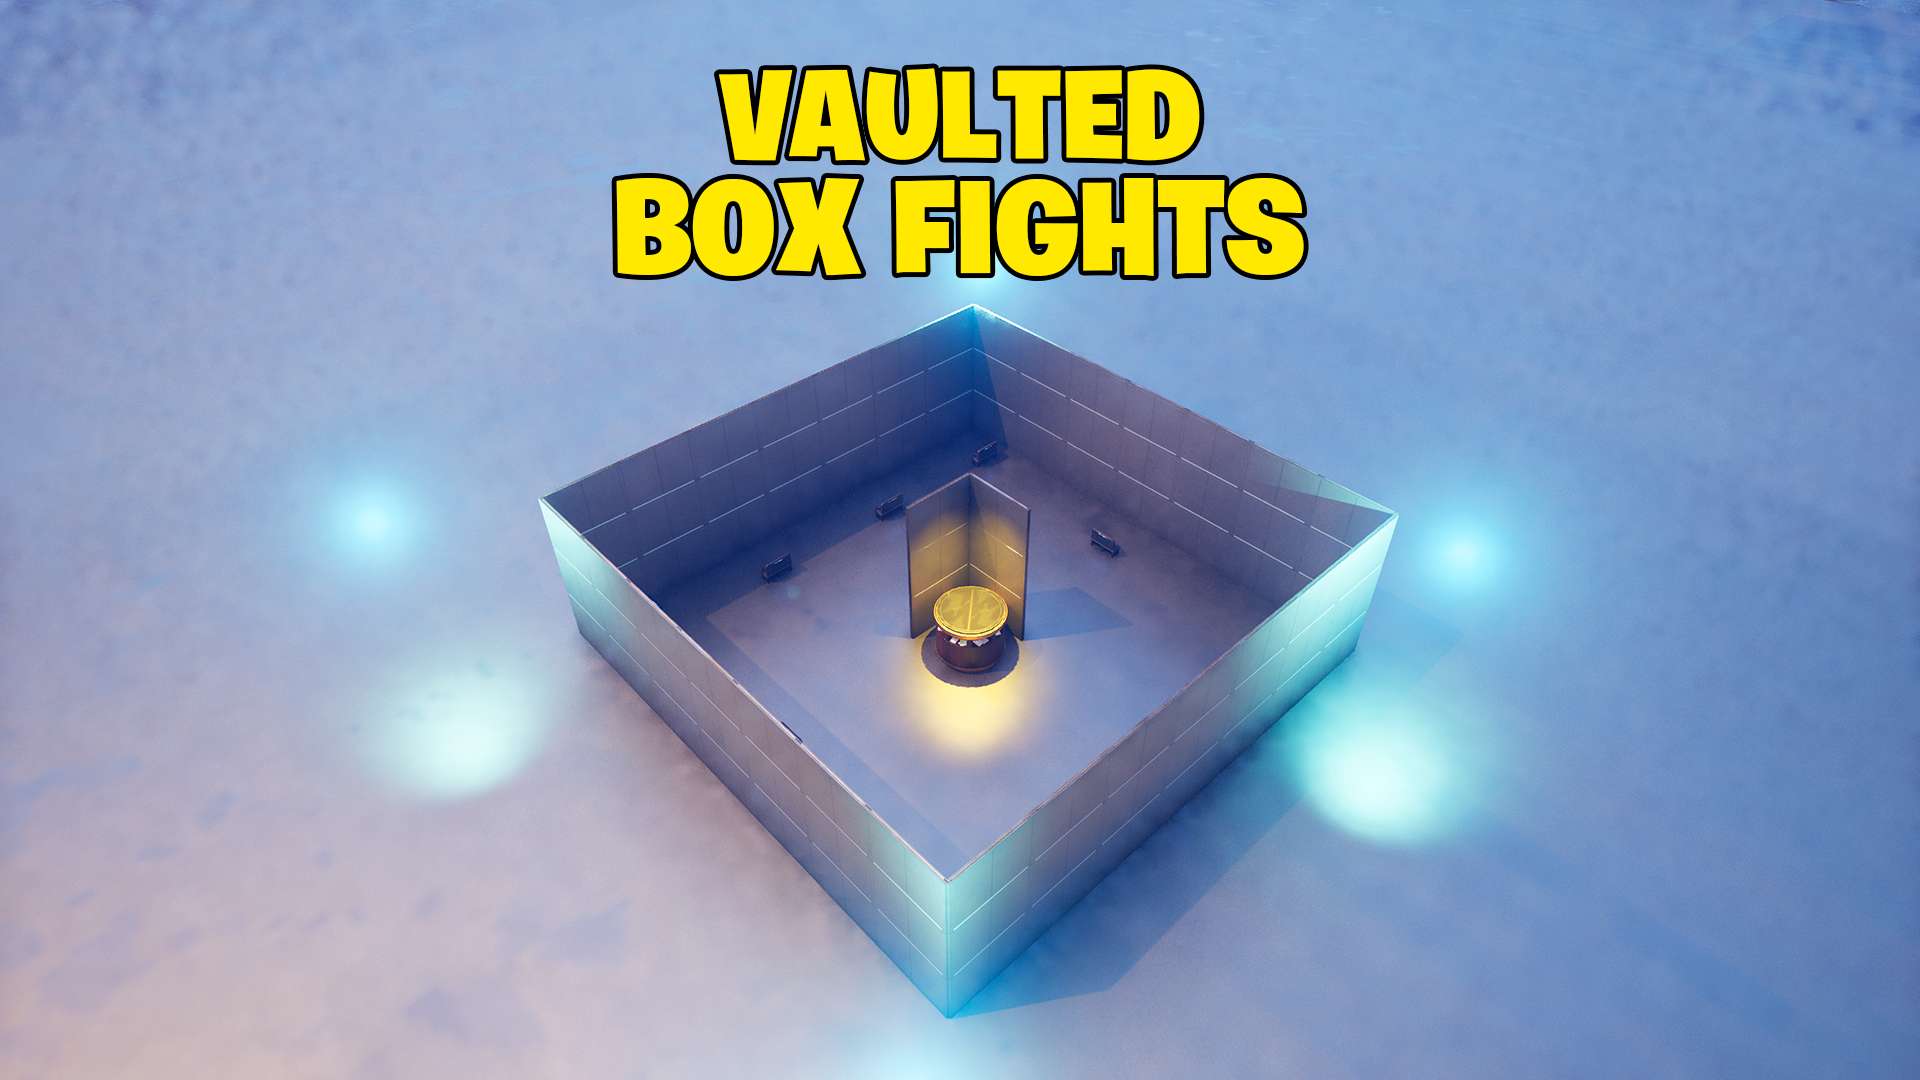 Vaulted Box Fights